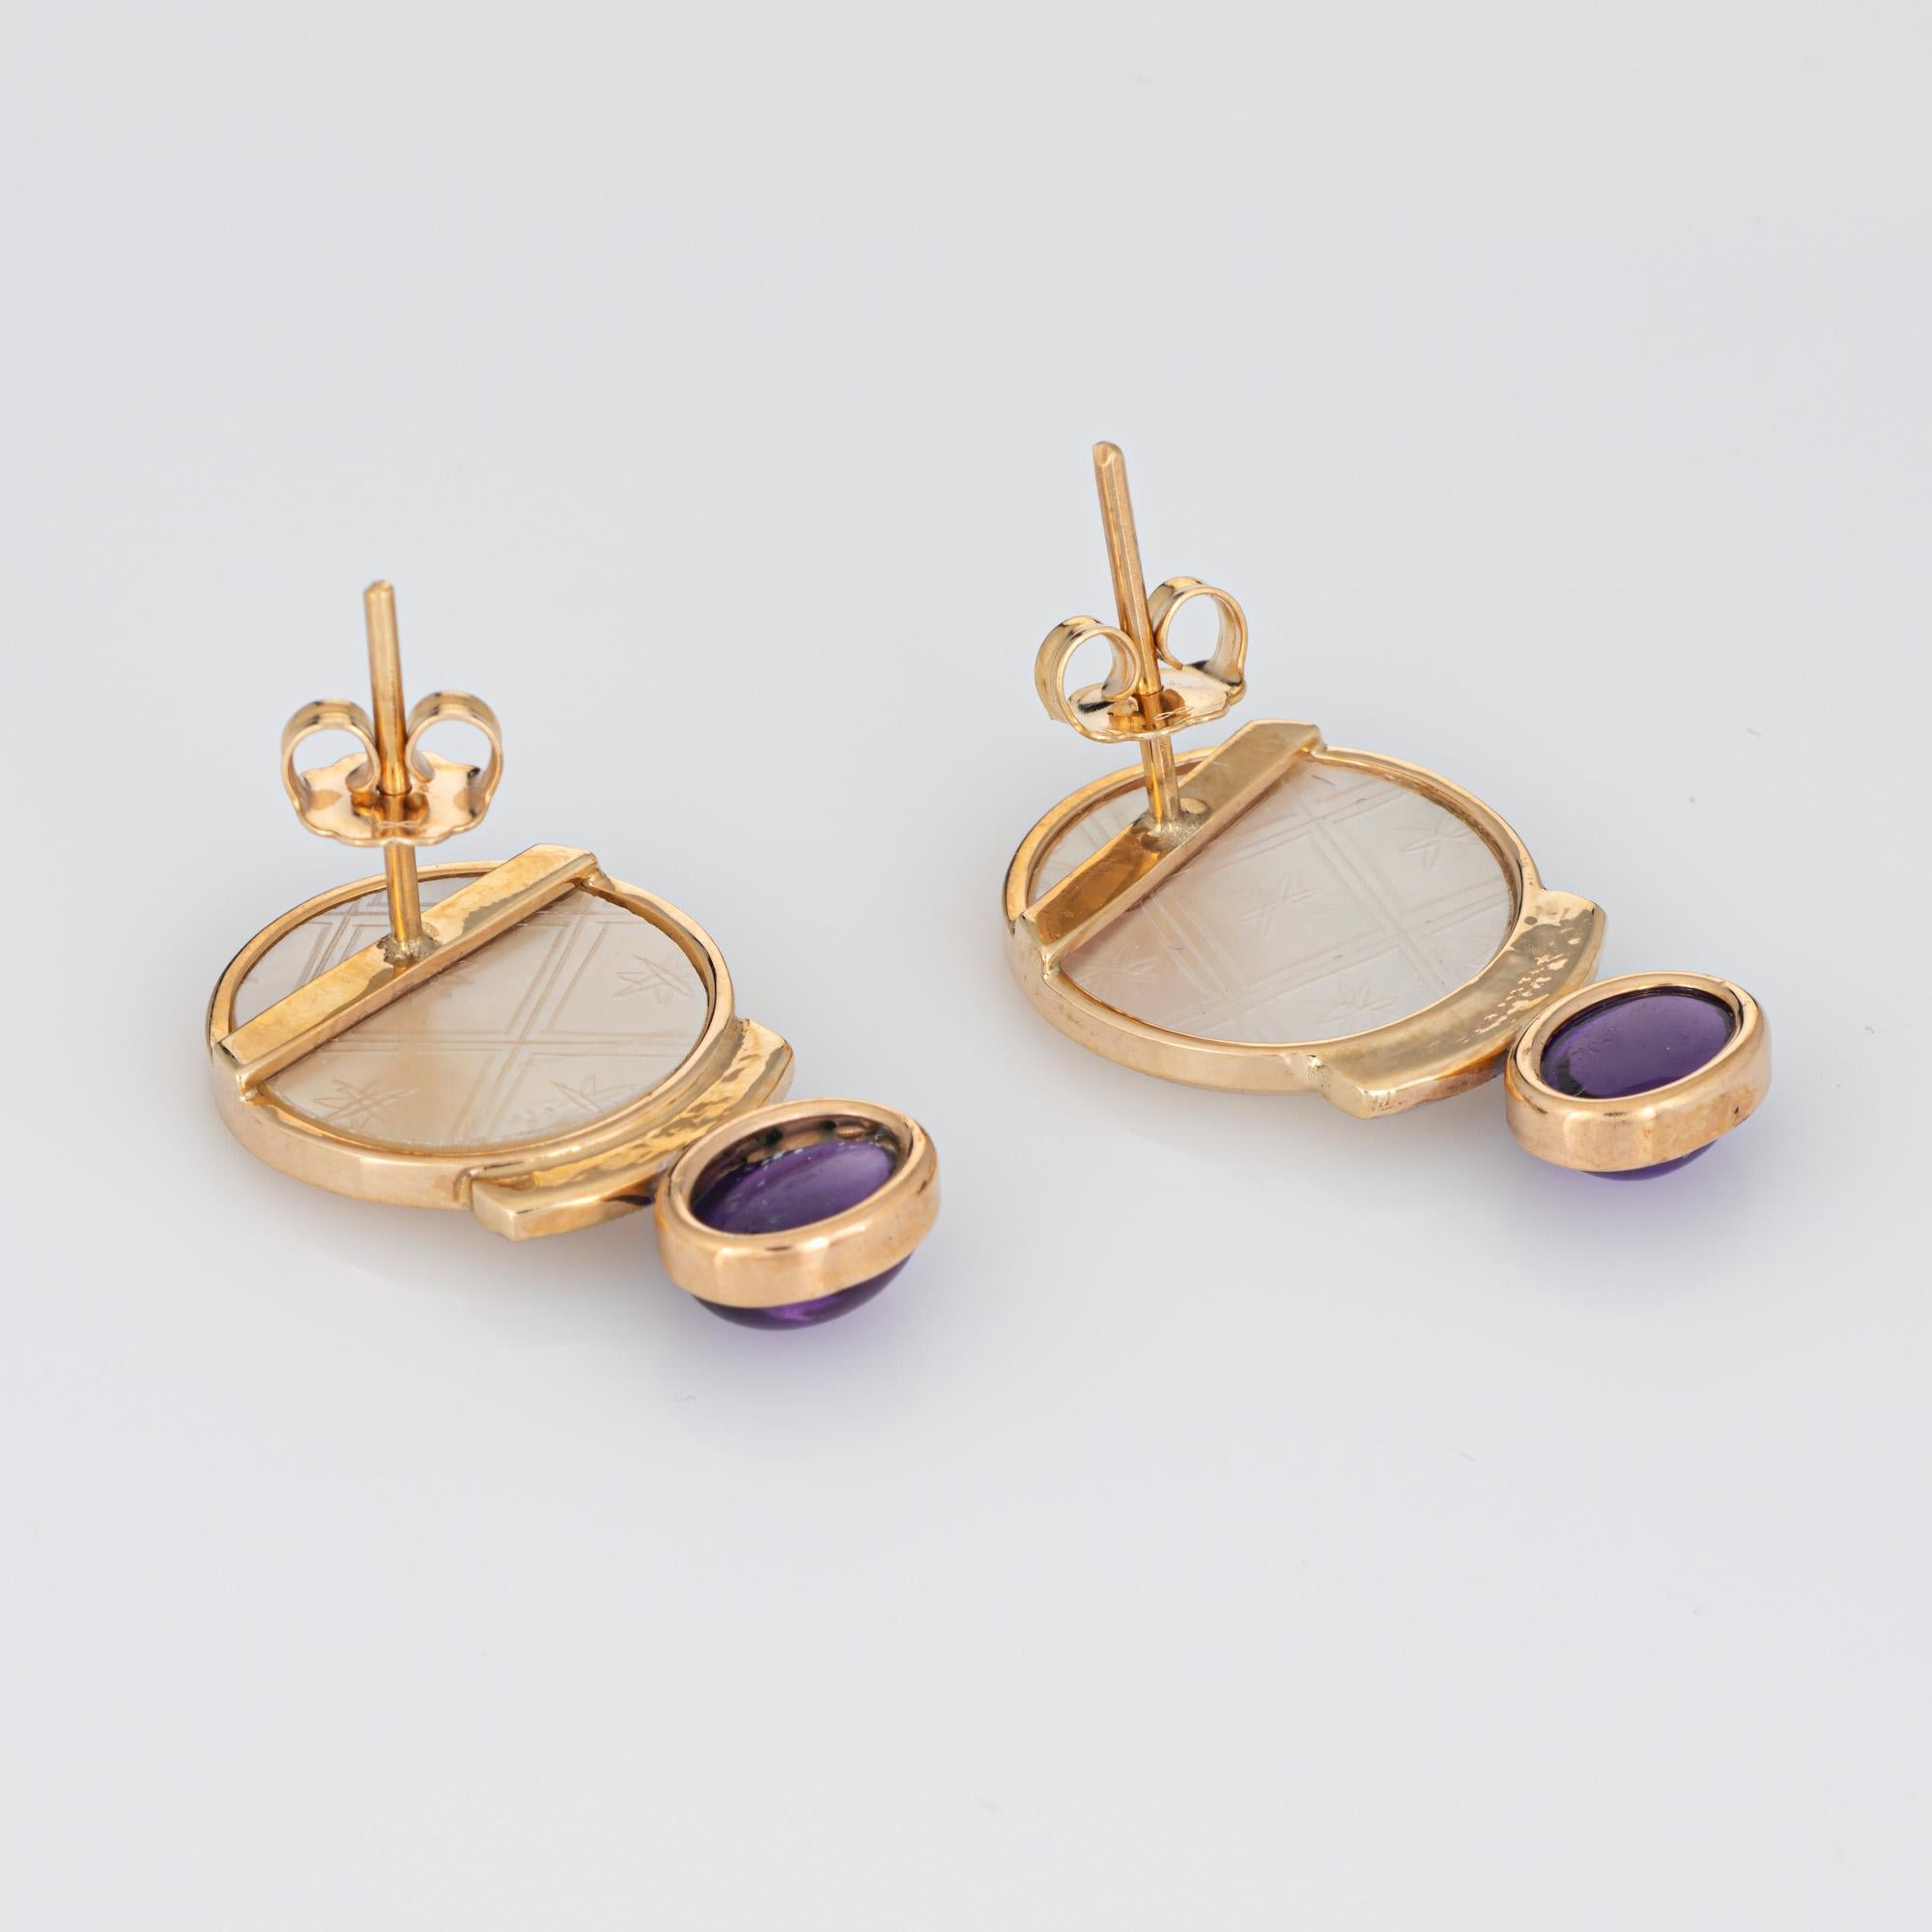 Finely detailed pair of vintage amethyst, diamond and mother of pearl earrings crafted in 14k yellow gold. 

Mother of pearl measures 13mm. Amethysts measure 8mm x 6mm. Diamonds total an estimated 0.06 carats (estimated at H-I color and SI1-I1